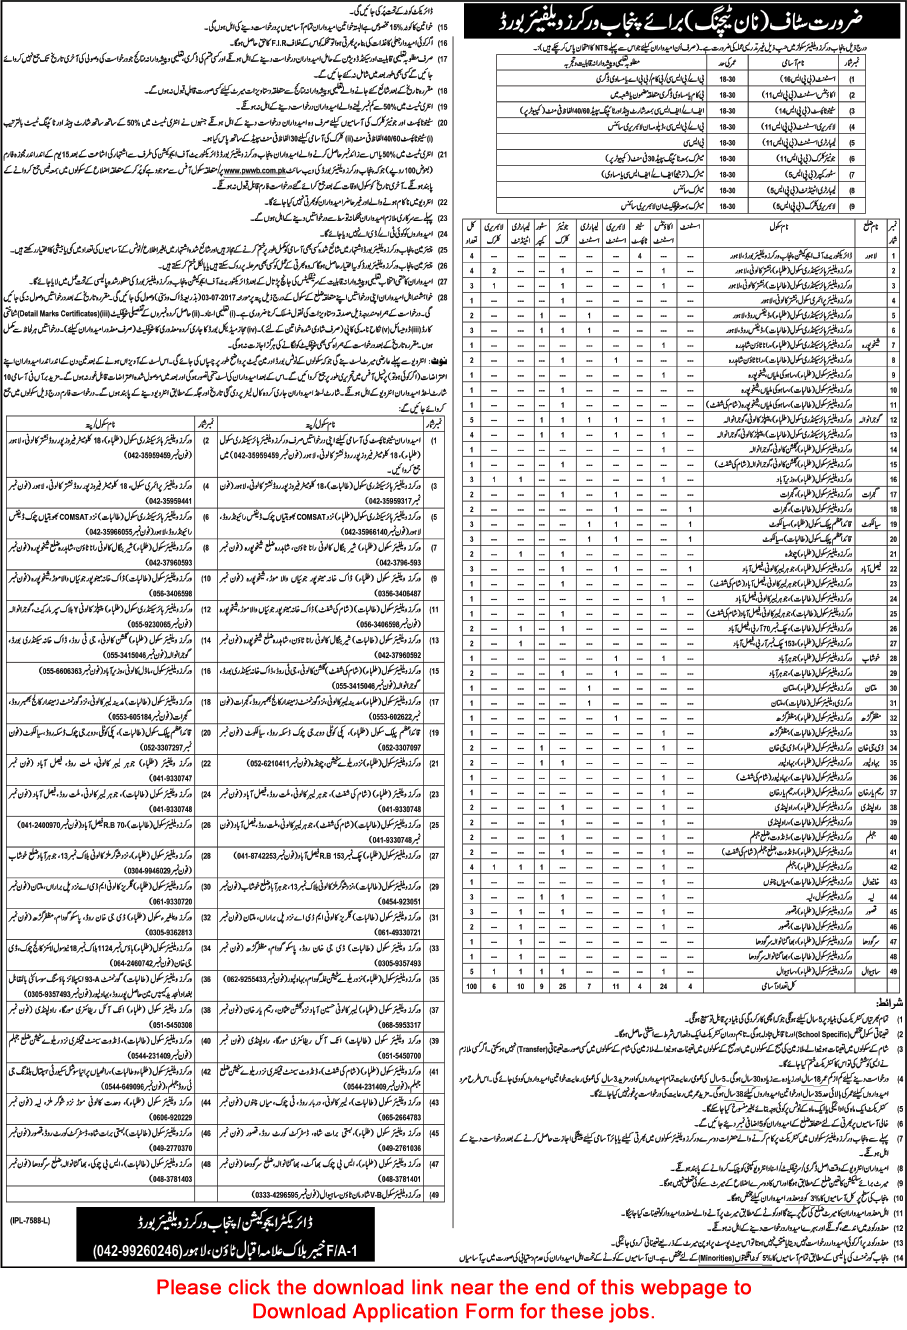 Punjab Workers Welfare Board Jobs June 2017 Application Form Clerks, Accounts Assistants & Others PWWB Latest